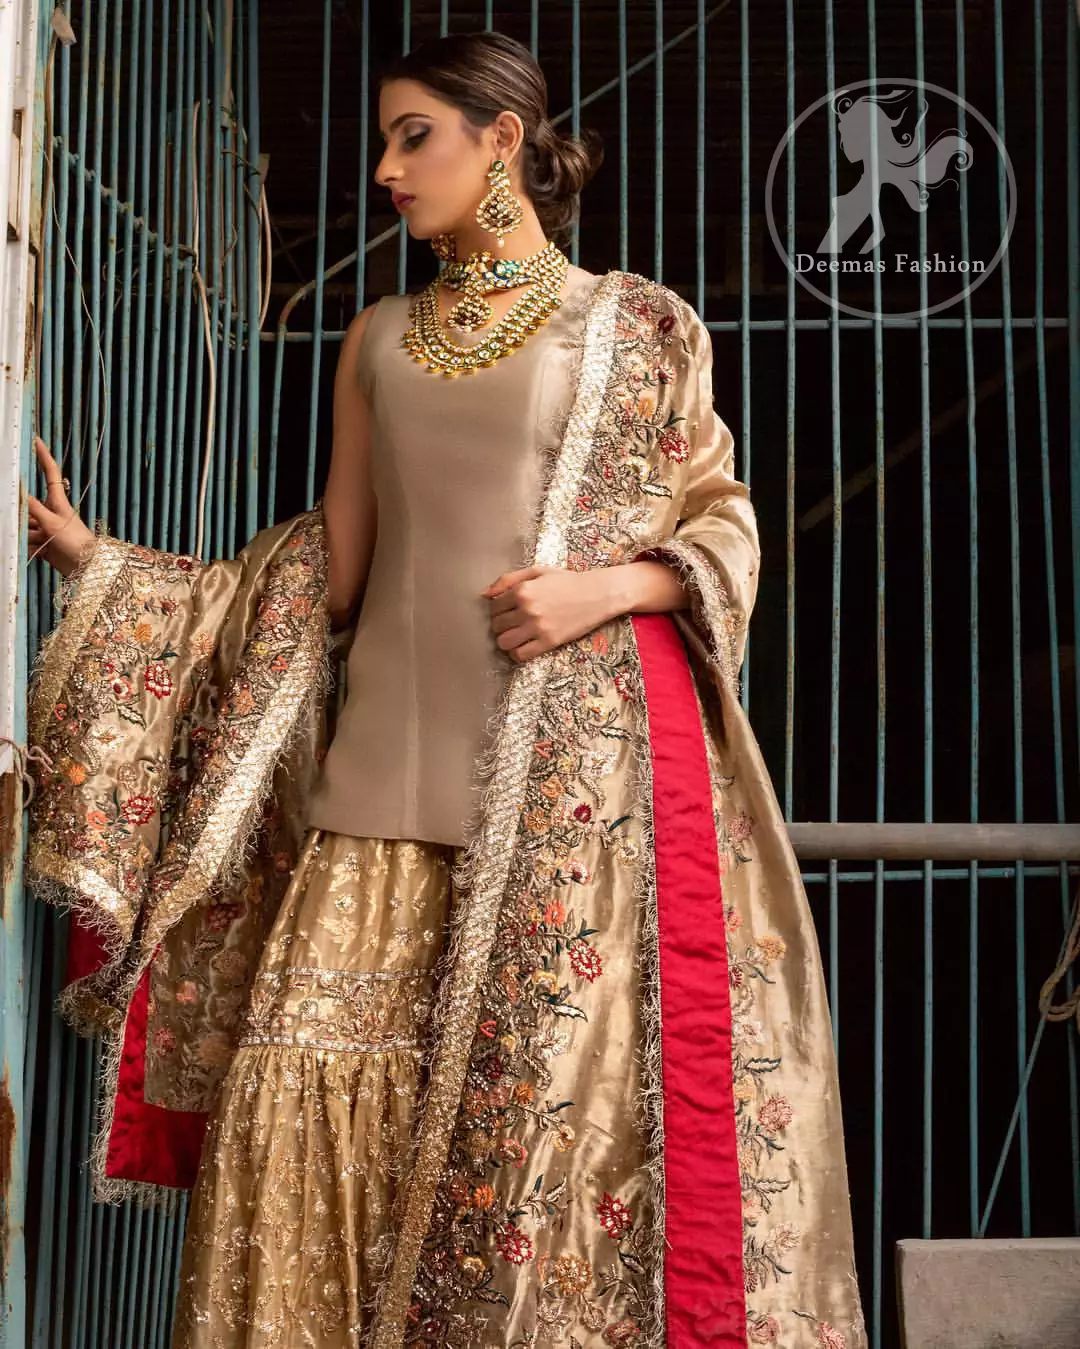 Ivory plain shirt is paired up with golden traditional gharara done with floral motifs all over. It is beautifully matched with golden dupatta with colorful embellished motifs at both lengths and lace border finished around dupatta.